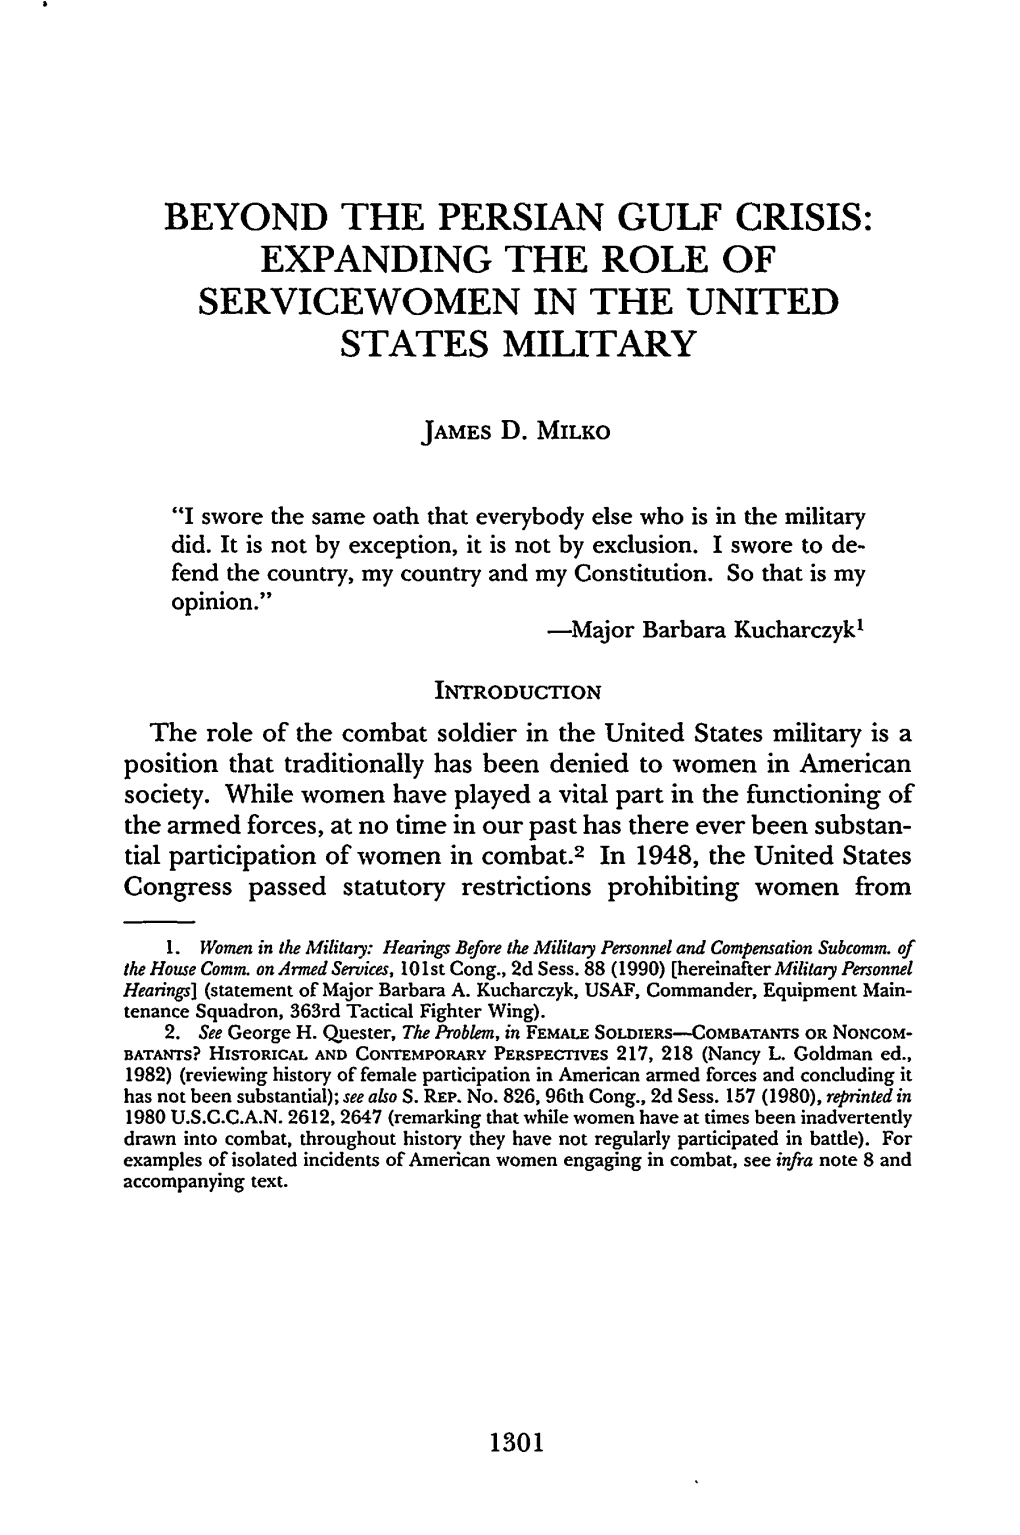 Expanding the Role of Servicewomen in the United States Military